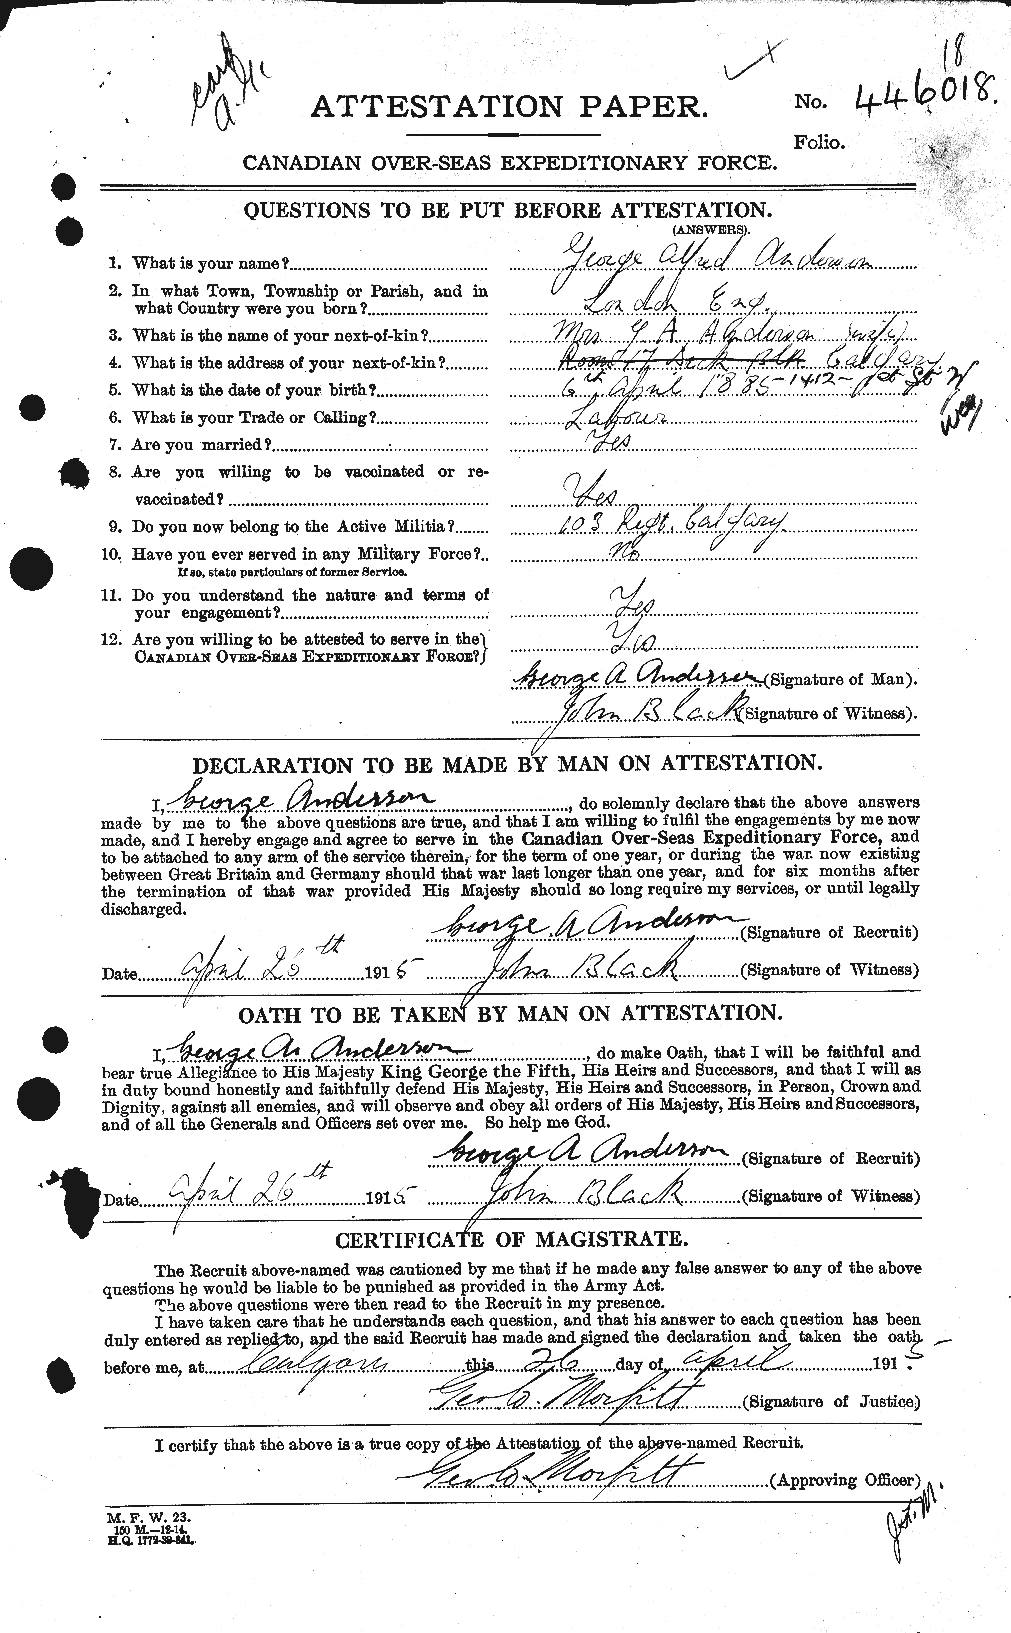 Personnel Records of the First World War - CEF 209739a